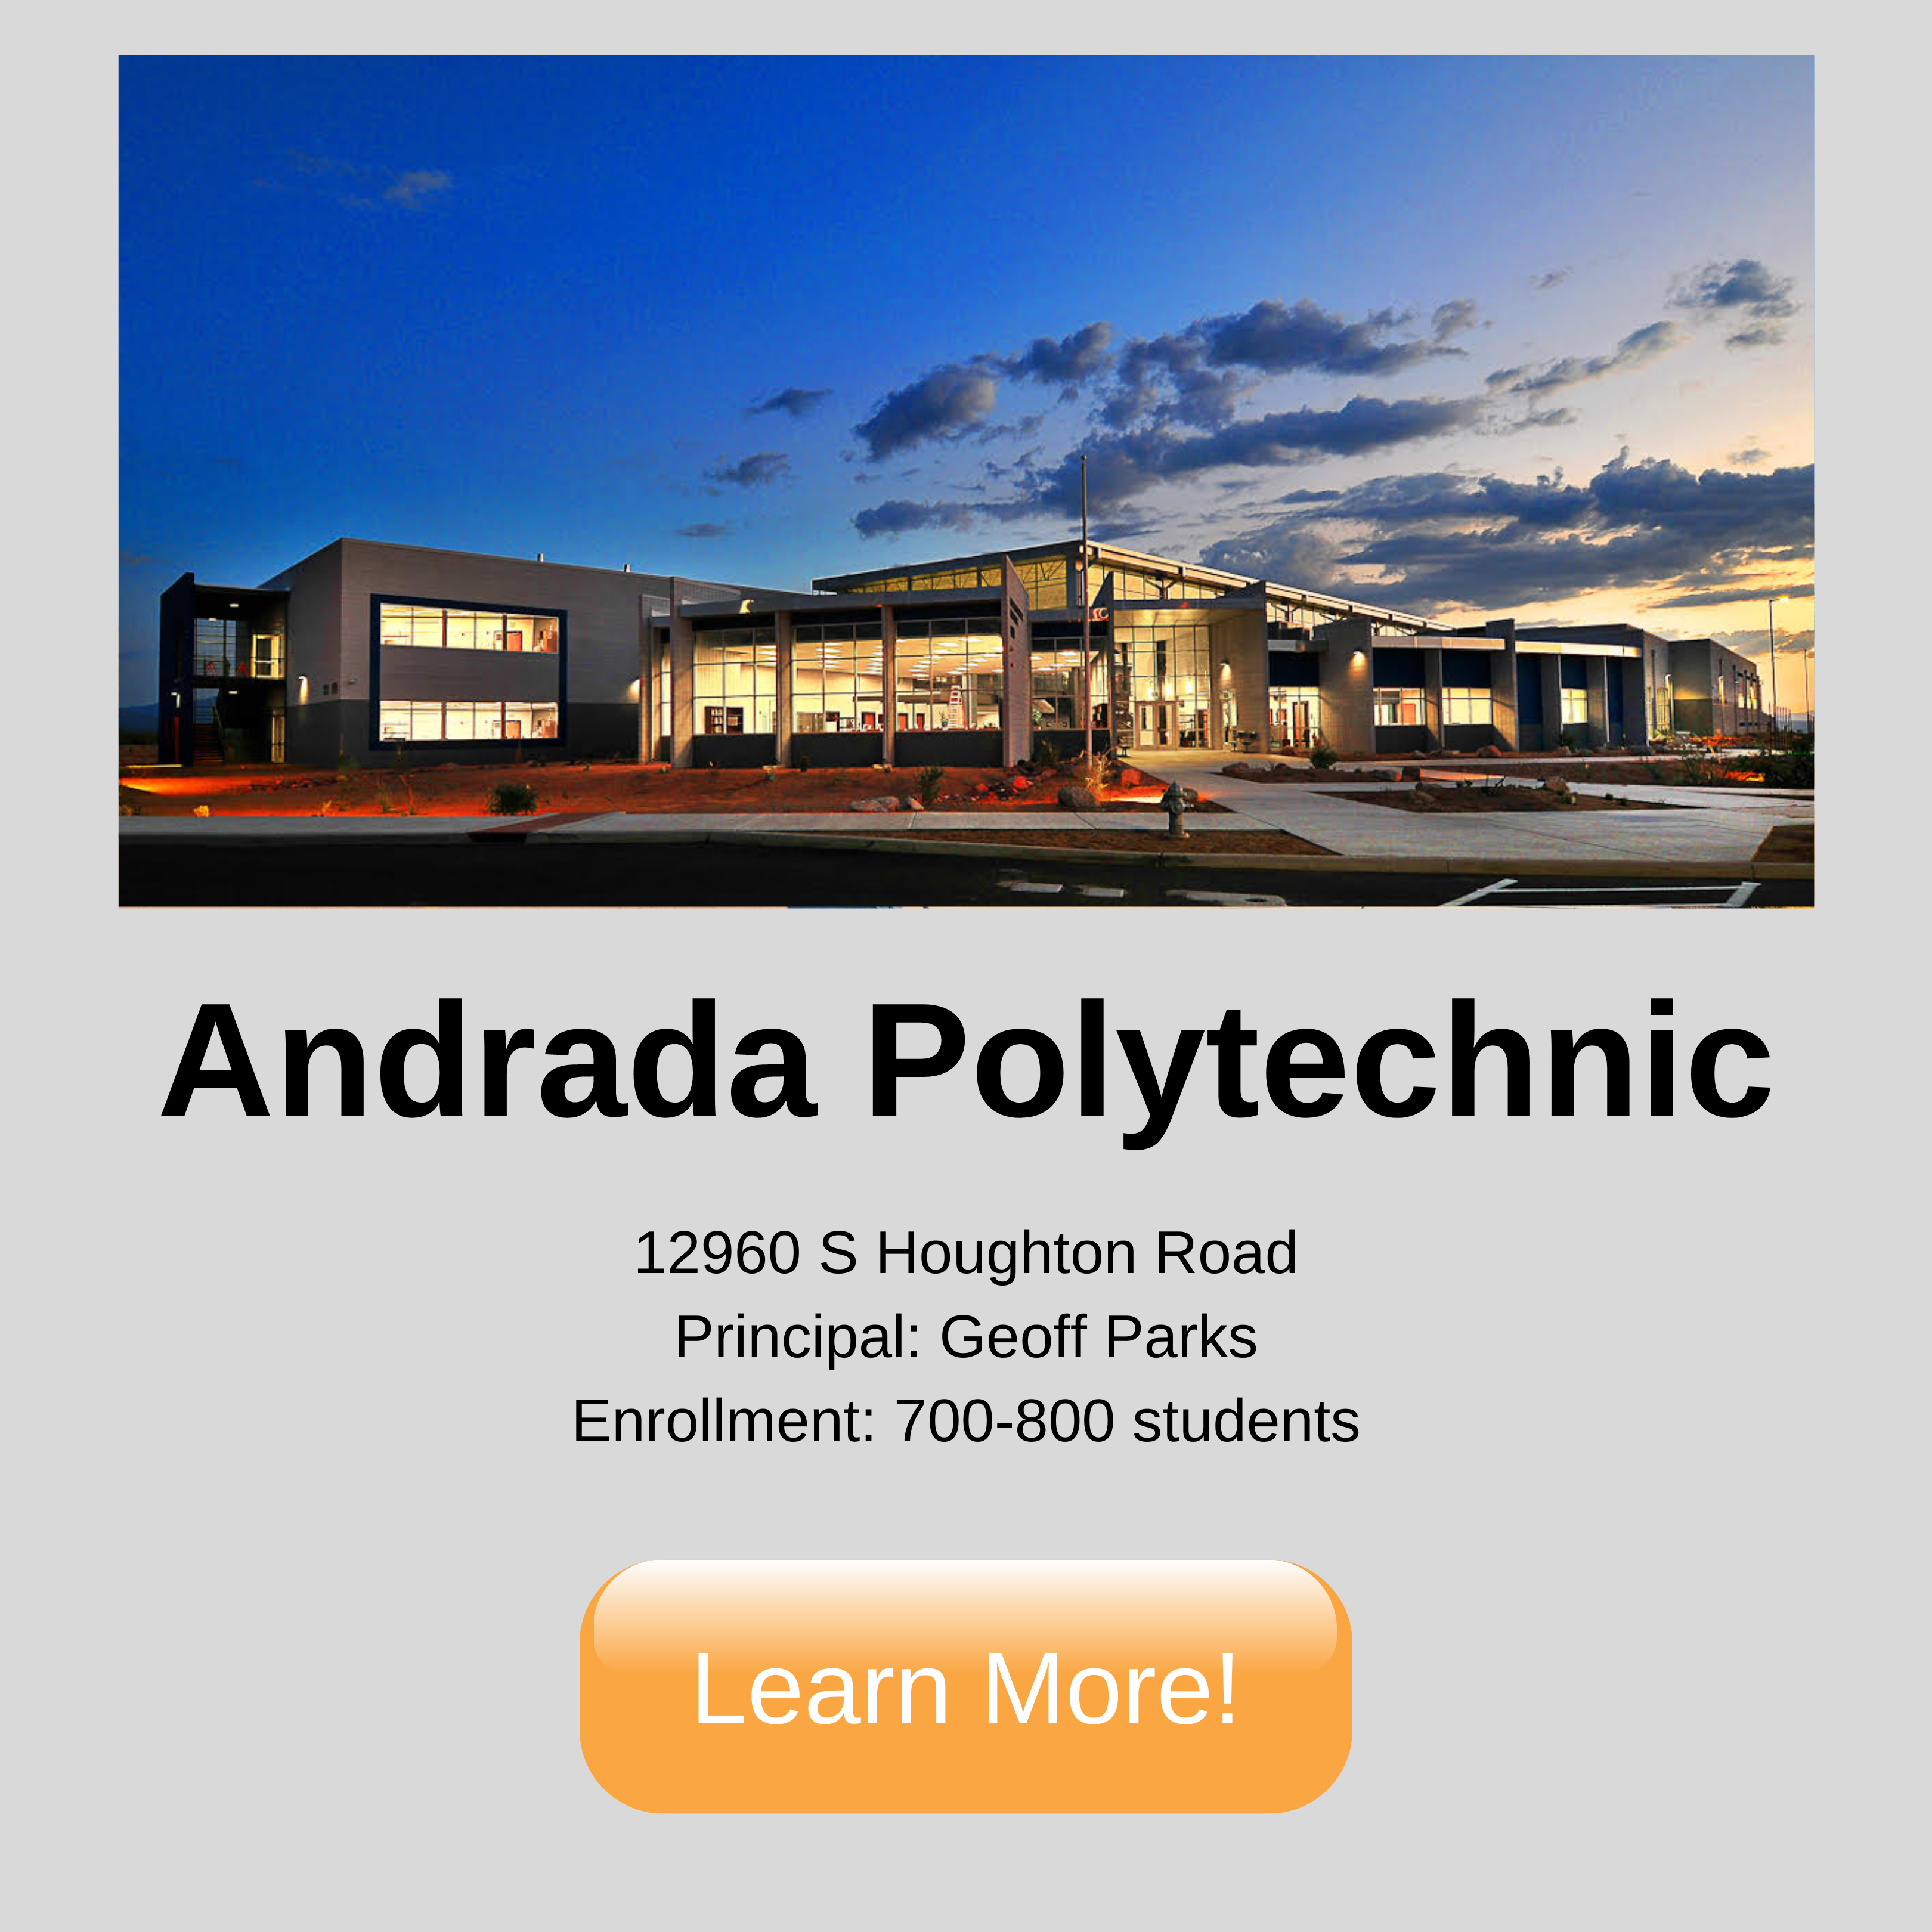 Andrada Polytechnic. 12960 S Houghton Road Principal: Geoff Parks Enrollment: 700-800 students. Click to learn more.